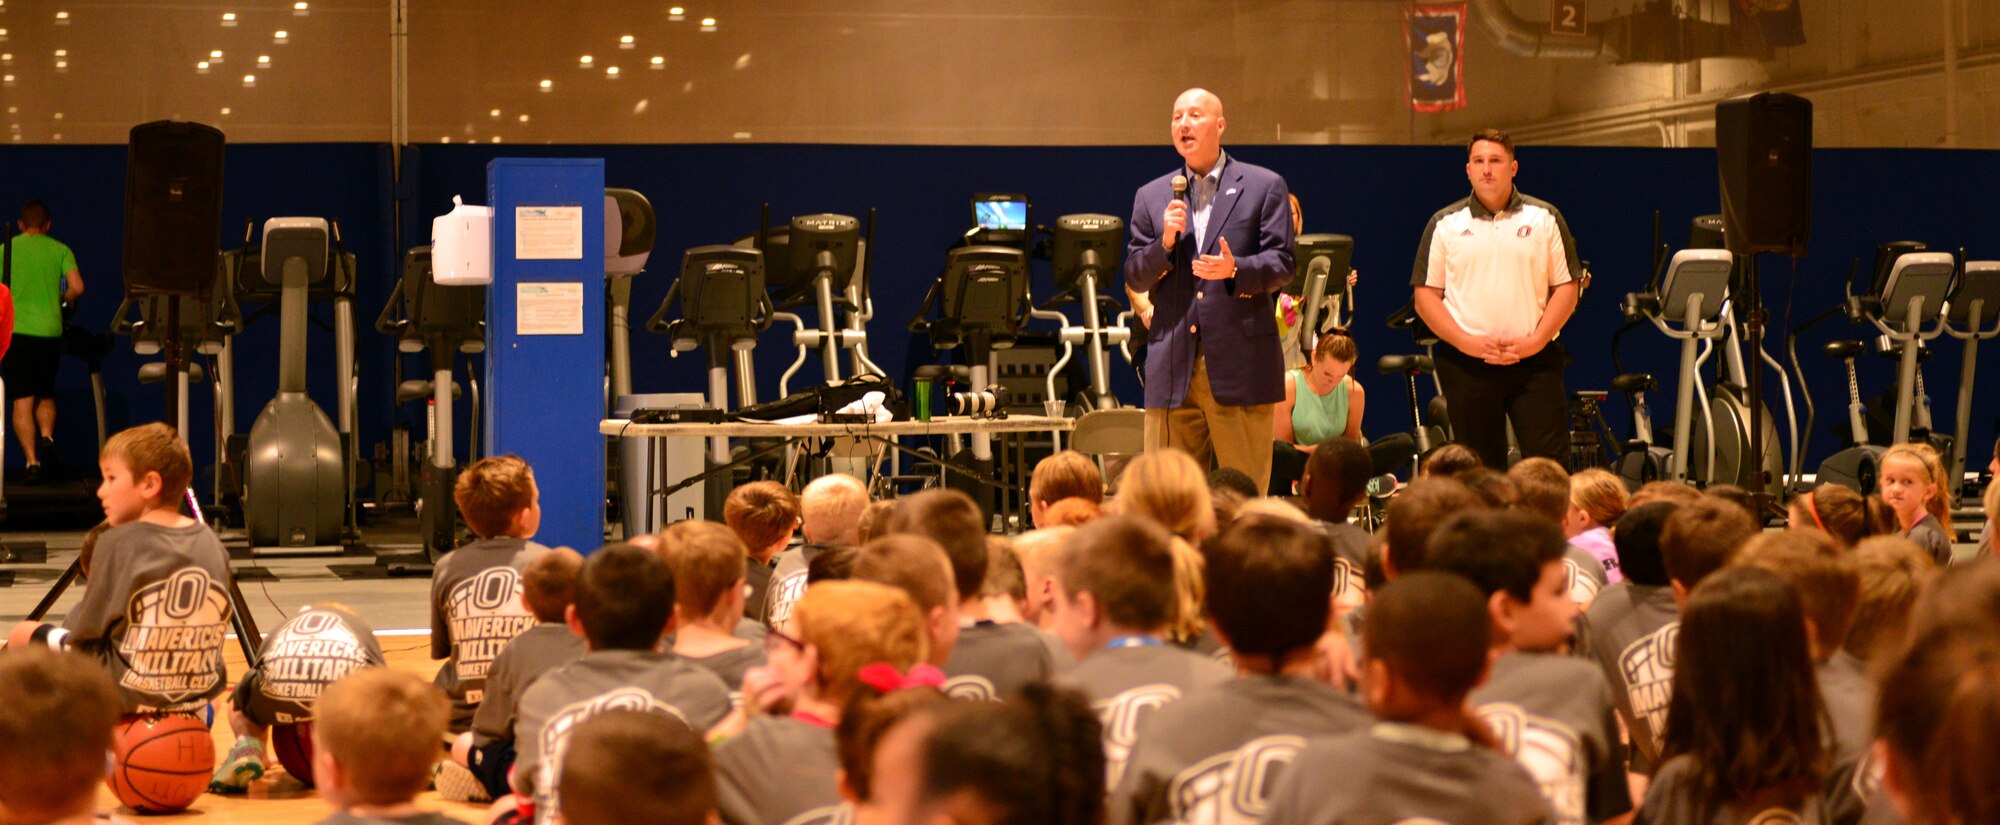 Nebraska Governor Pete Ricketts speaks to Team Offutt children Oct. 15, 2016 at the Offutt Field House. Governor Ricketts thanked the children and their families for everything they do to protect our freedom. The UNO Mavericks’ men’s and women’s basketball teams provided a free basketball clinic to more than 100 military-affiliated children. Nebraska Governor Pete Ricketts spoke to the campers and passed along thanks from the citizens of Nebraska to the members of Team Offutt.